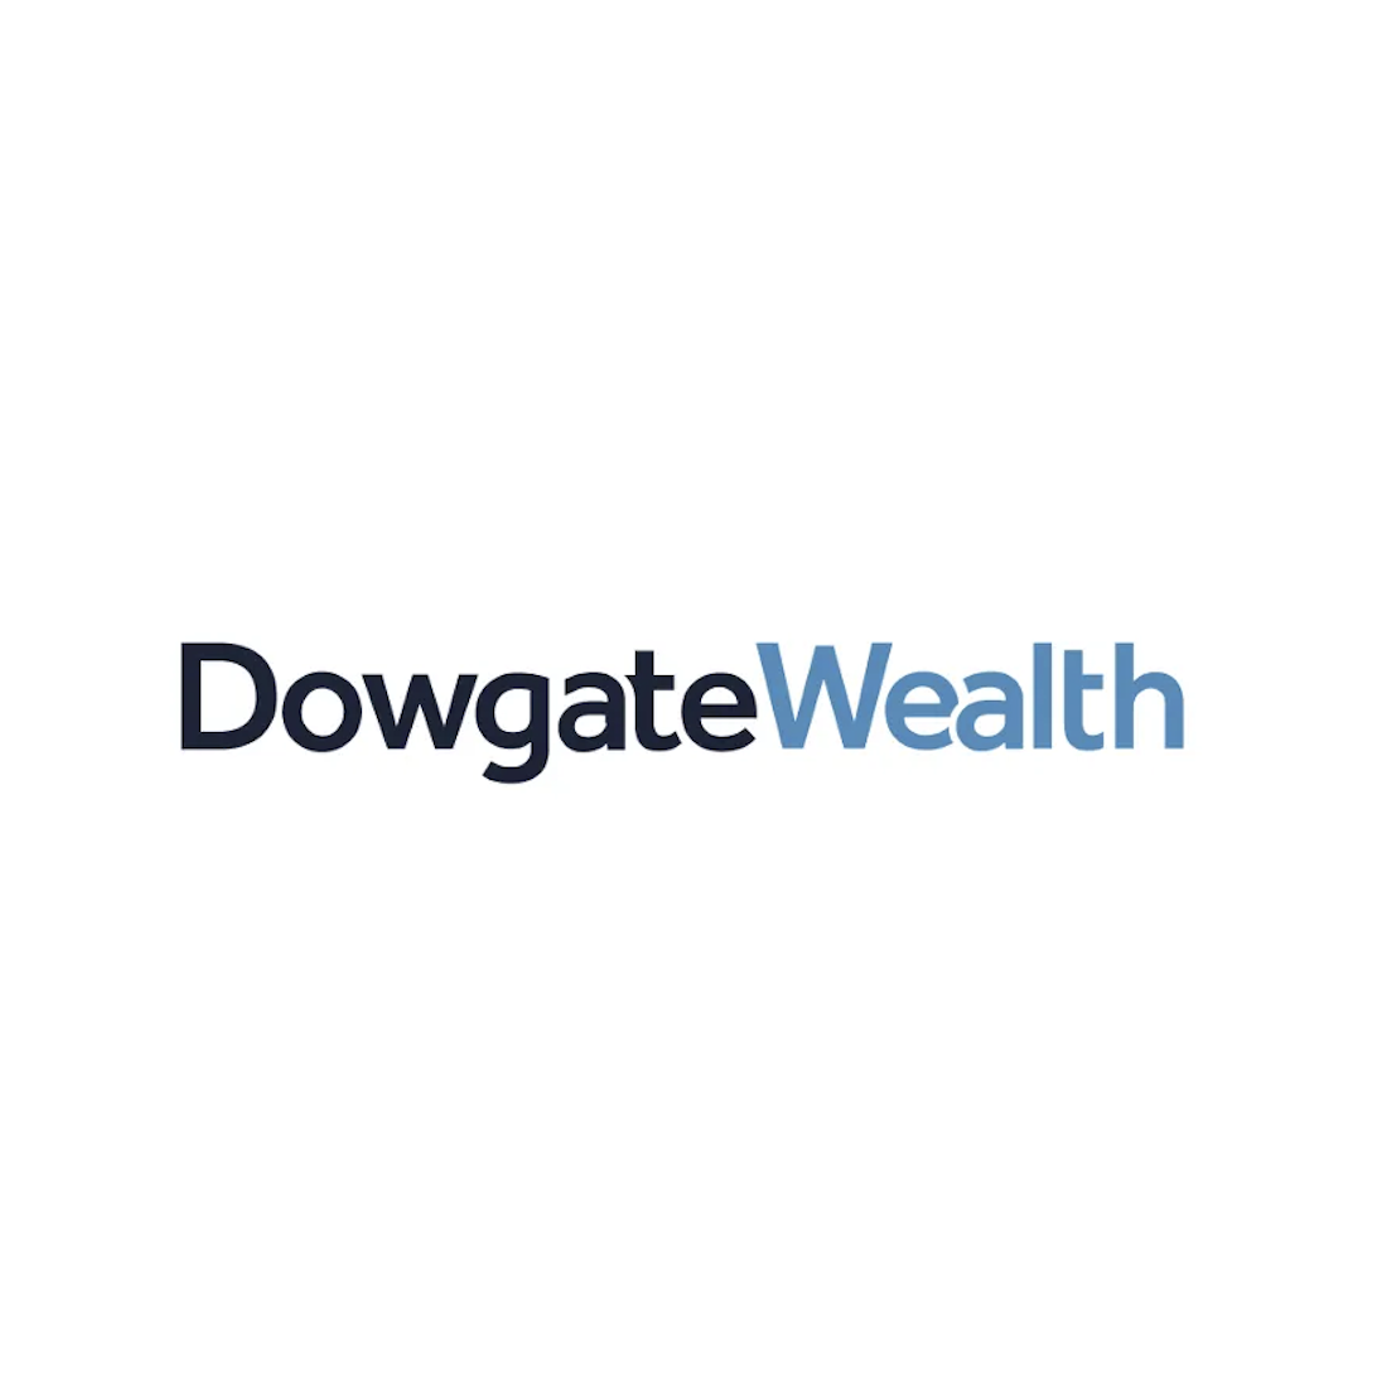 1906: Fund manager interview with Laurence Hulse of Dowgate